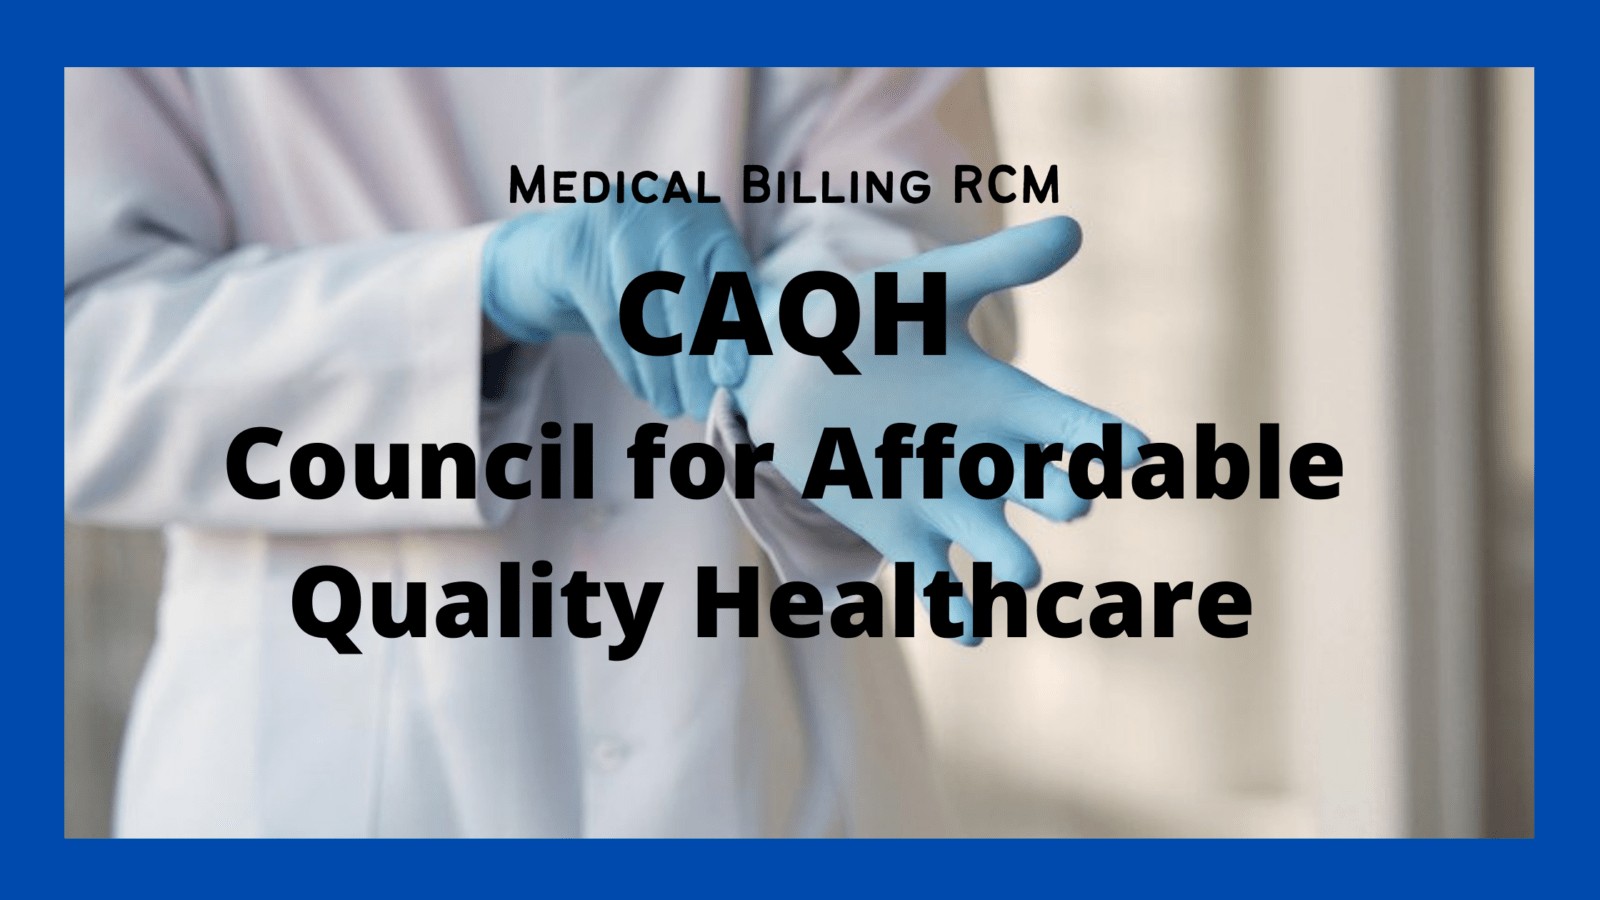 CAQH- Council for Affordable Quality Healthcare detail info